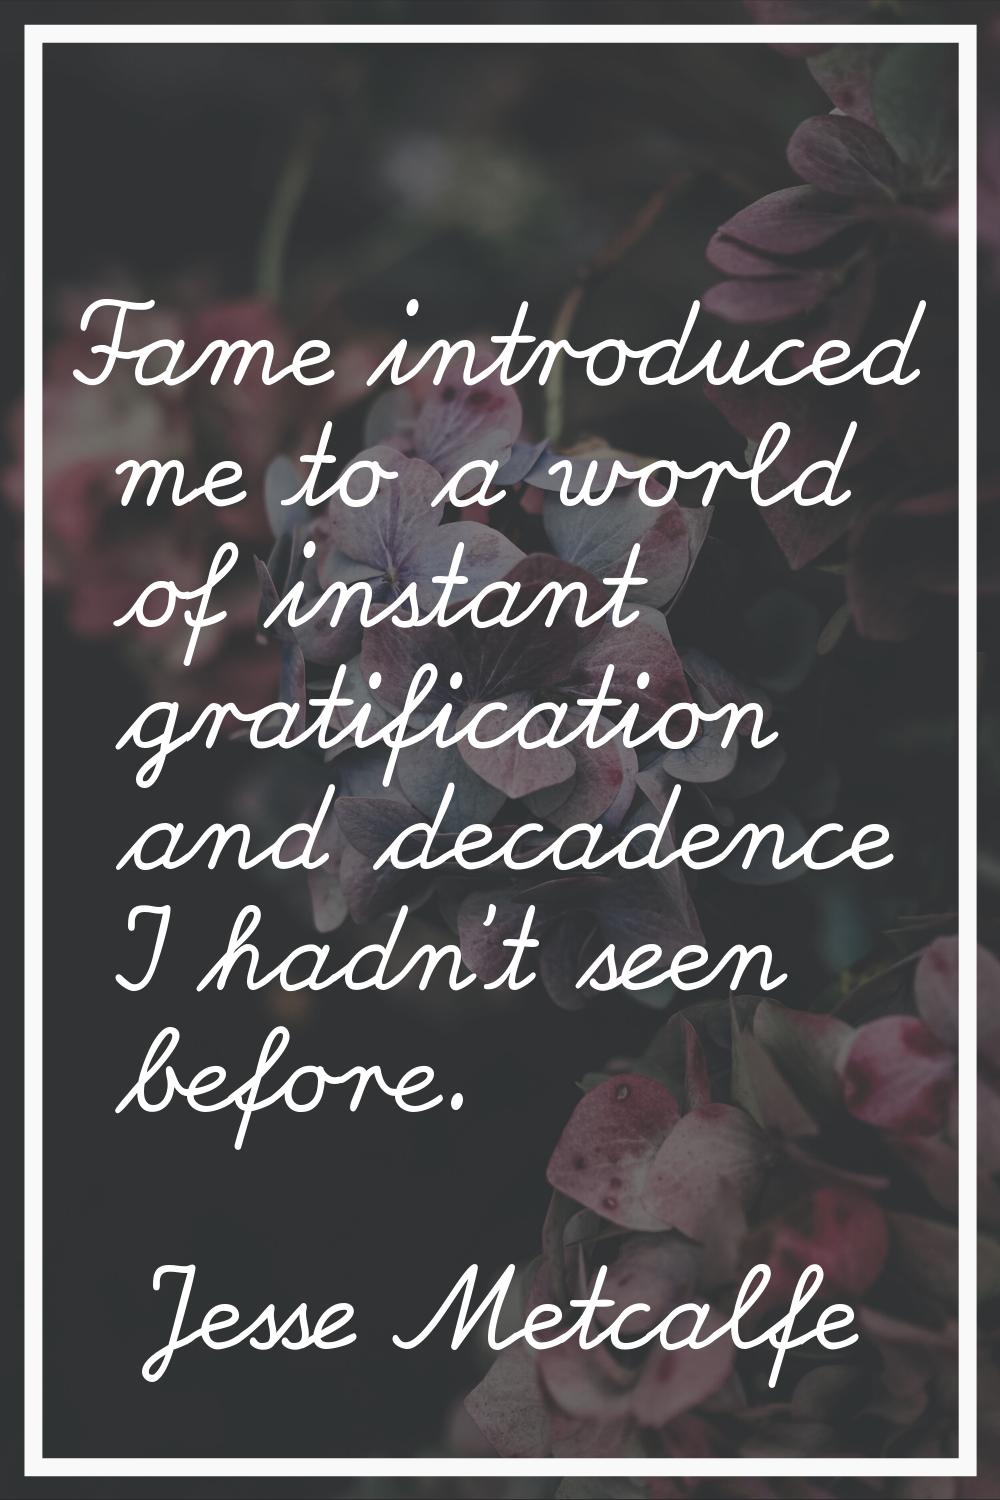 Fame introduced me to a world of instant gratification and decadence I hadn't seen before.